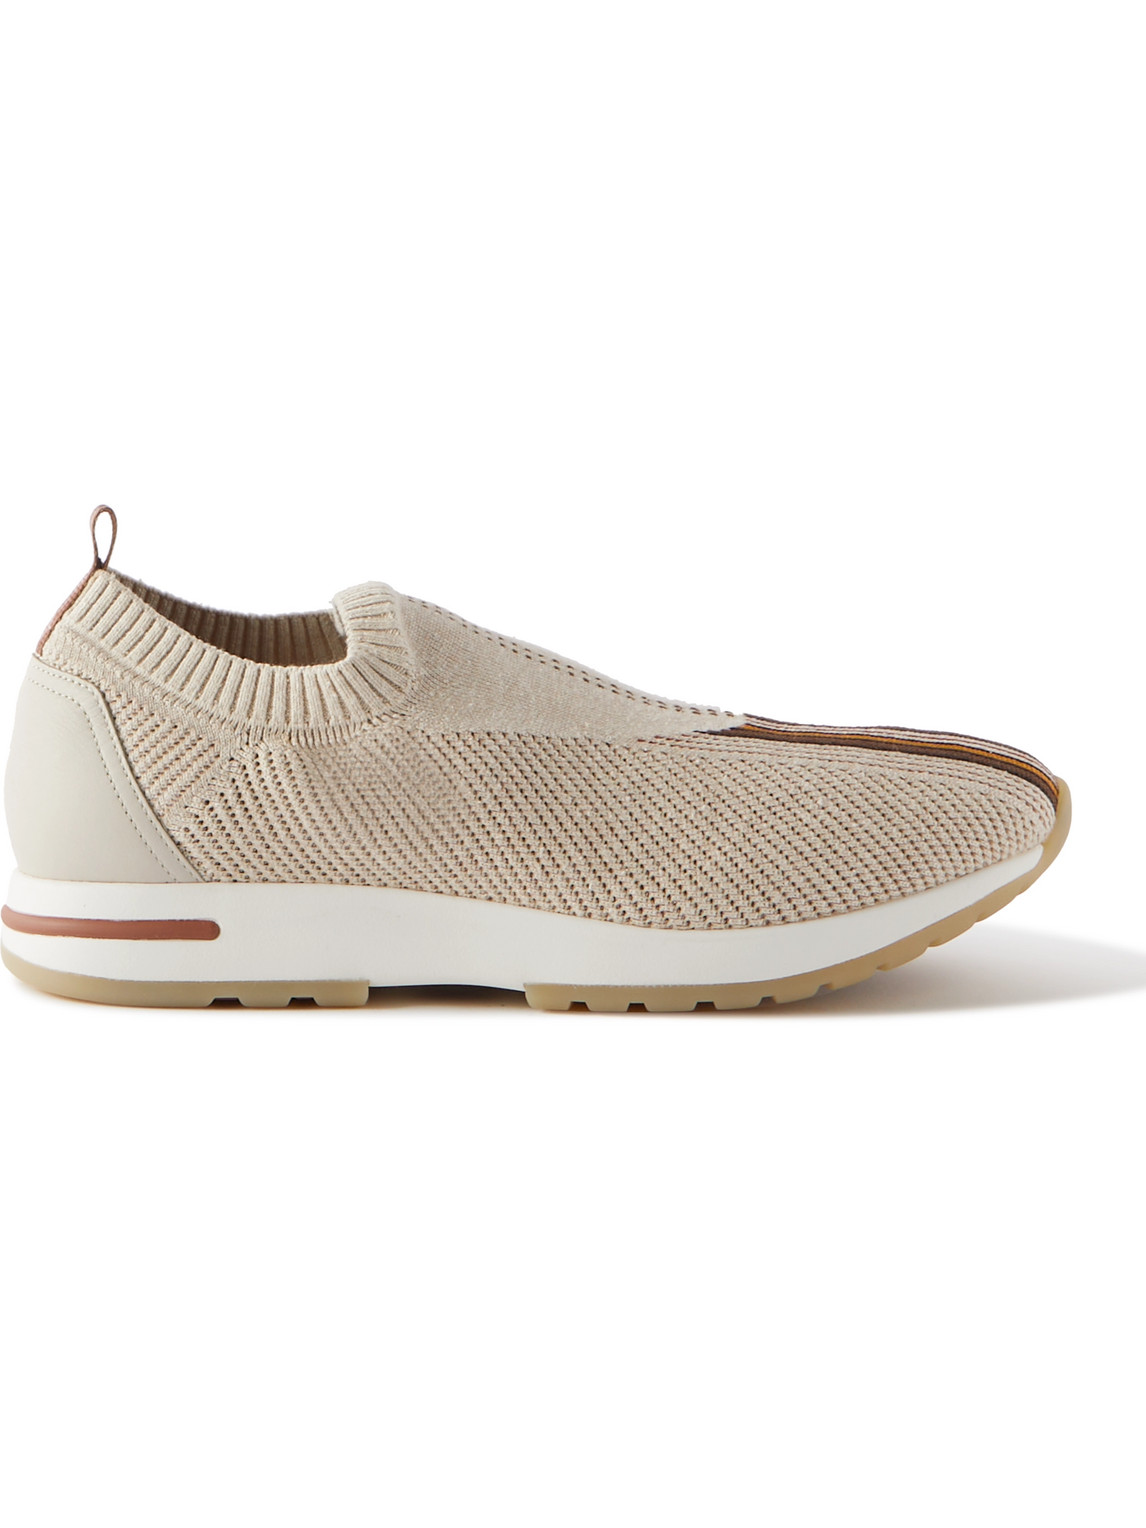 360 Lp Flexy Walk Leather-Trimmed Linen and Silk-Blend Slip-On Sneakers